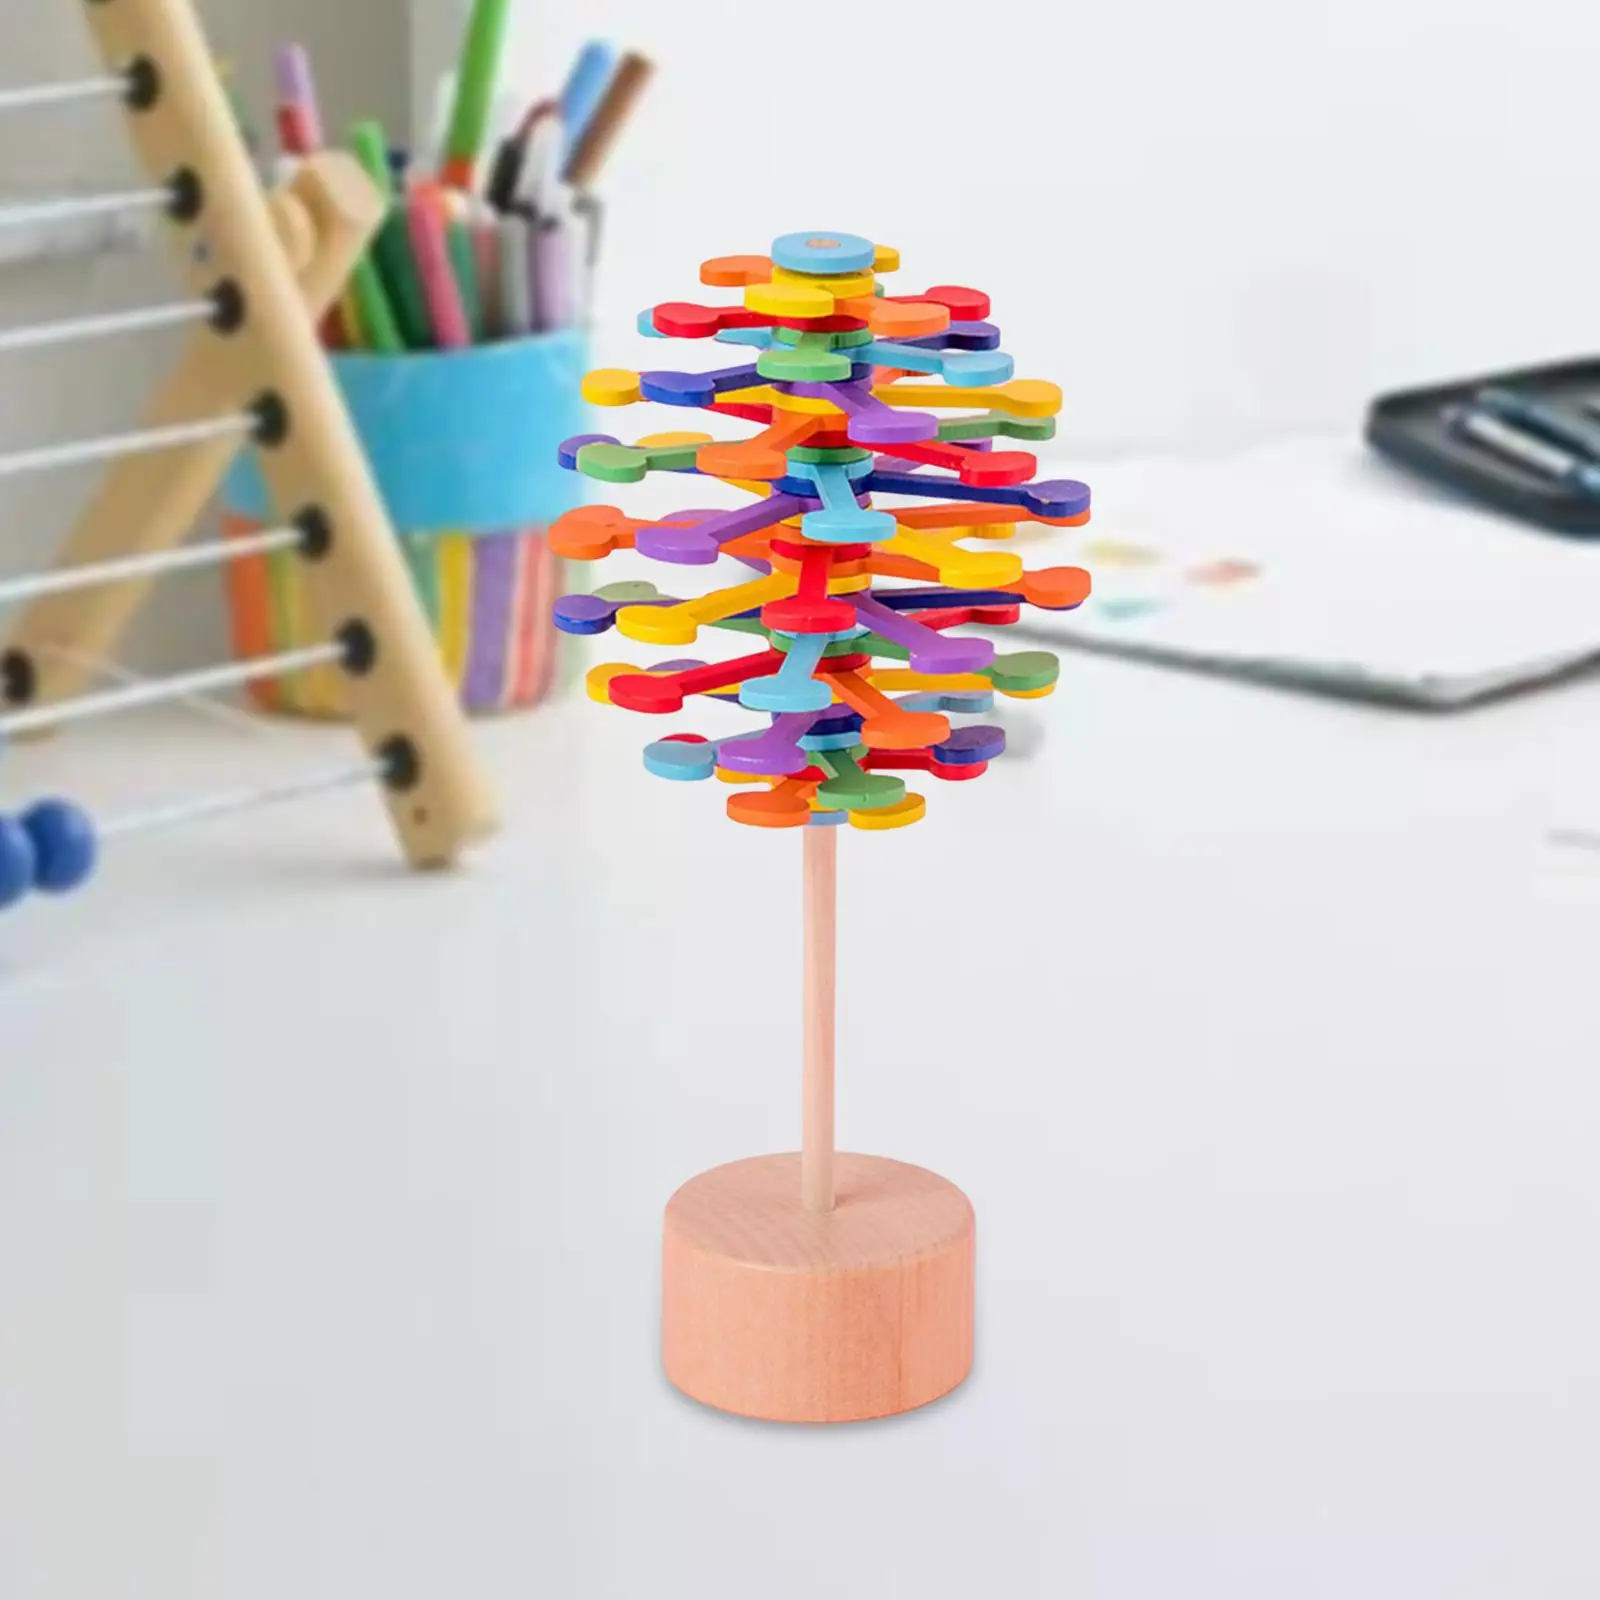 Multicolor Rotating Spiral Lollipop Sensory Toys Hand Toys for Office Party